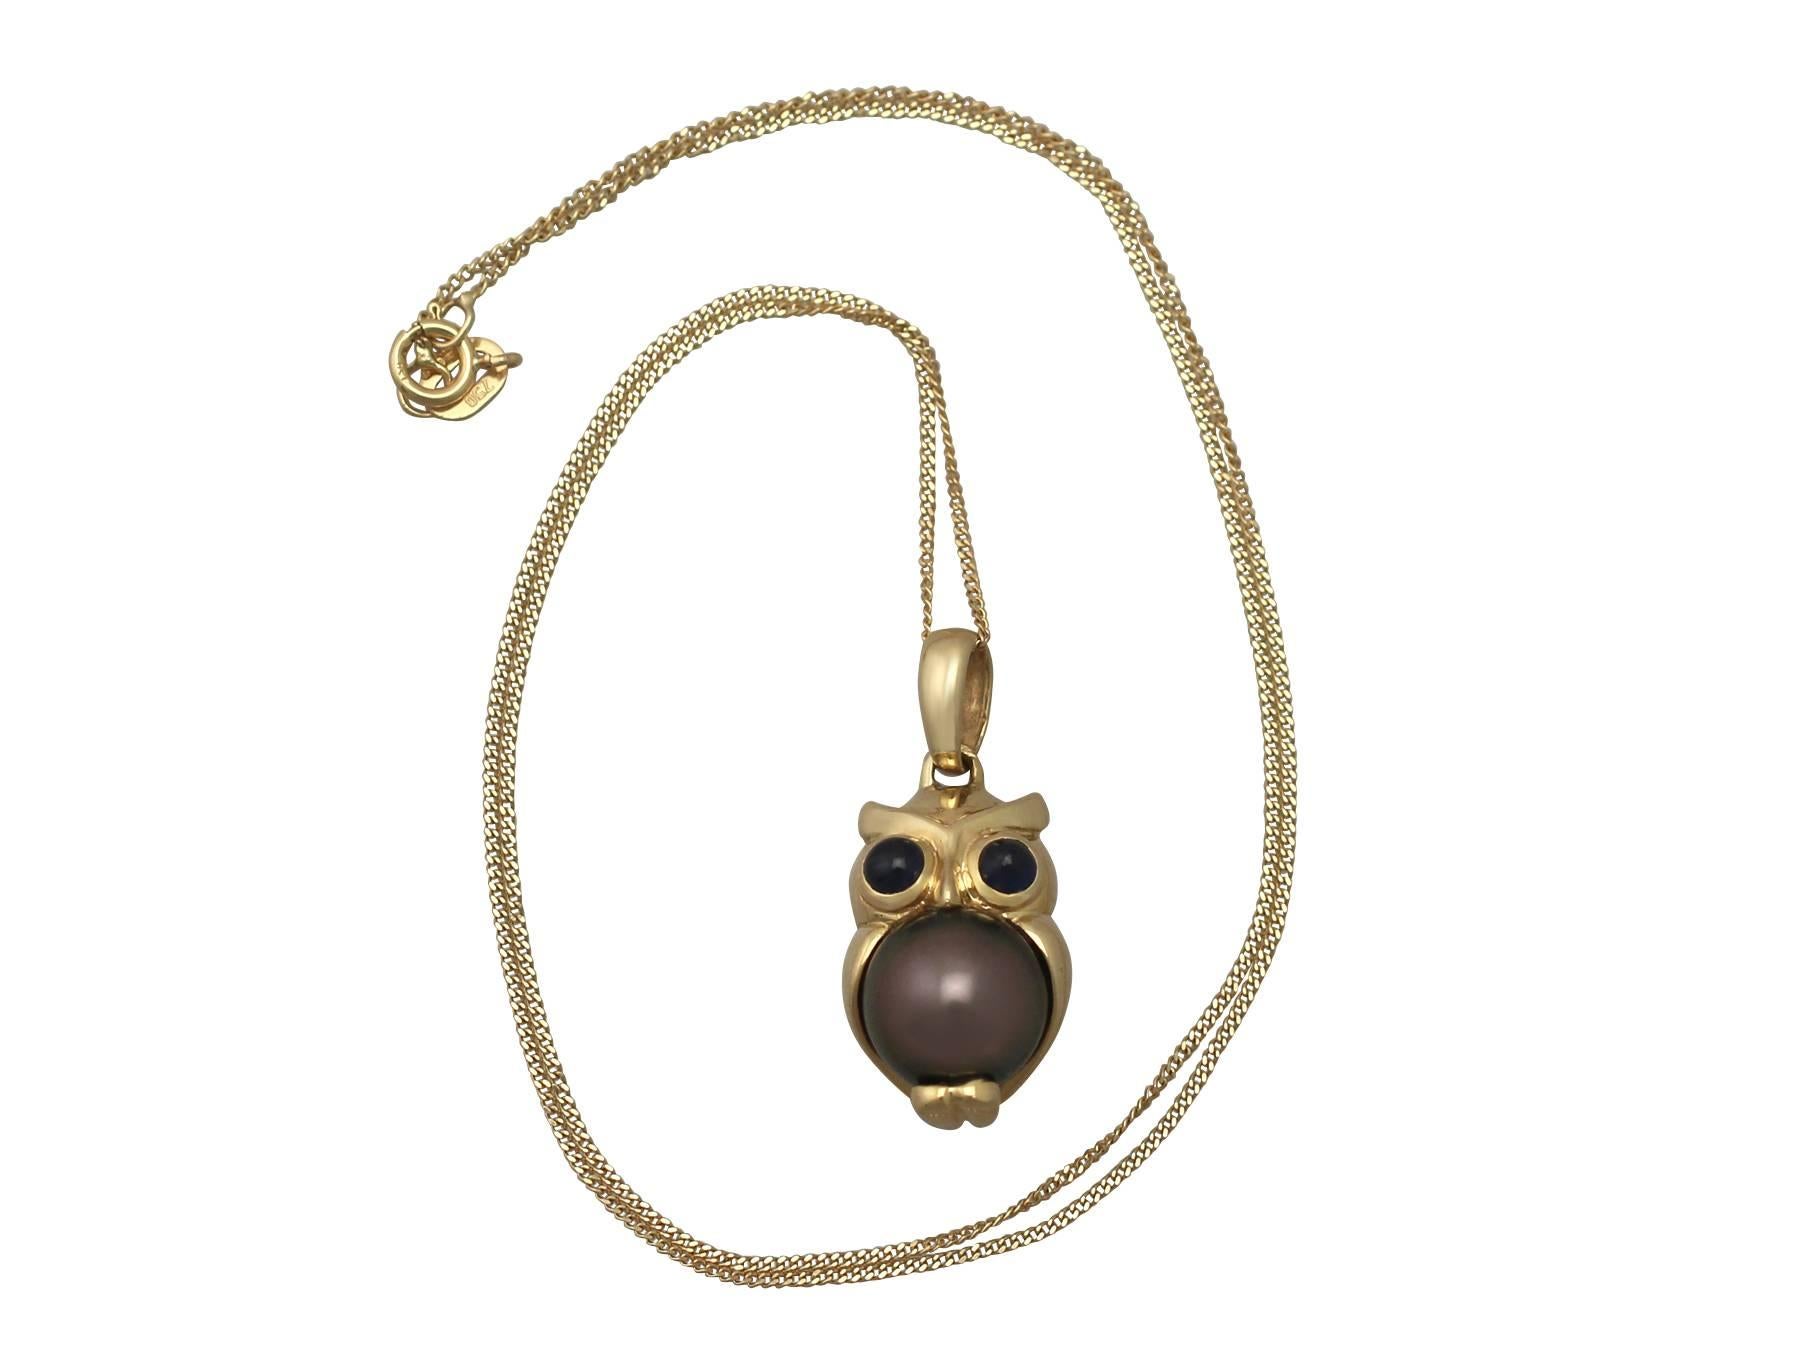 A fine and impressive 0.21 carat blue sapphire and black cultured pearl, 18 karat yellow gold 'owl' pendant; part of our diverse vintage jewellery collections

This fine and impressive vintage owl pendant has been crafted in 18 k yellow gold.

The